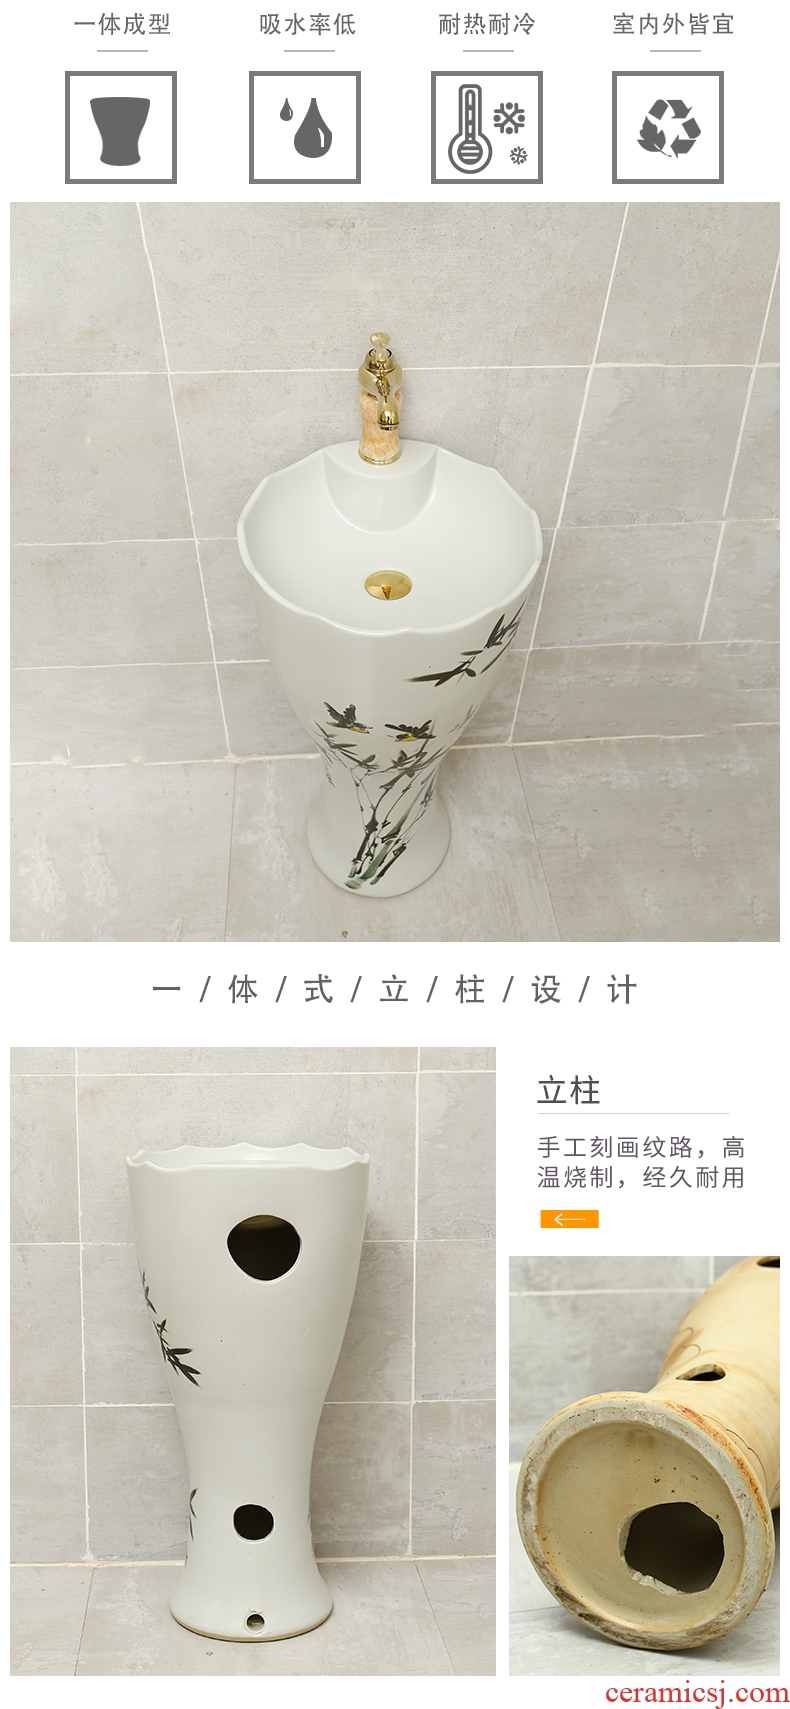 Pottery and porcelain of song dynasty household one-piece basin integrated basin outdoor toilet lavabo courtyard floor pillar